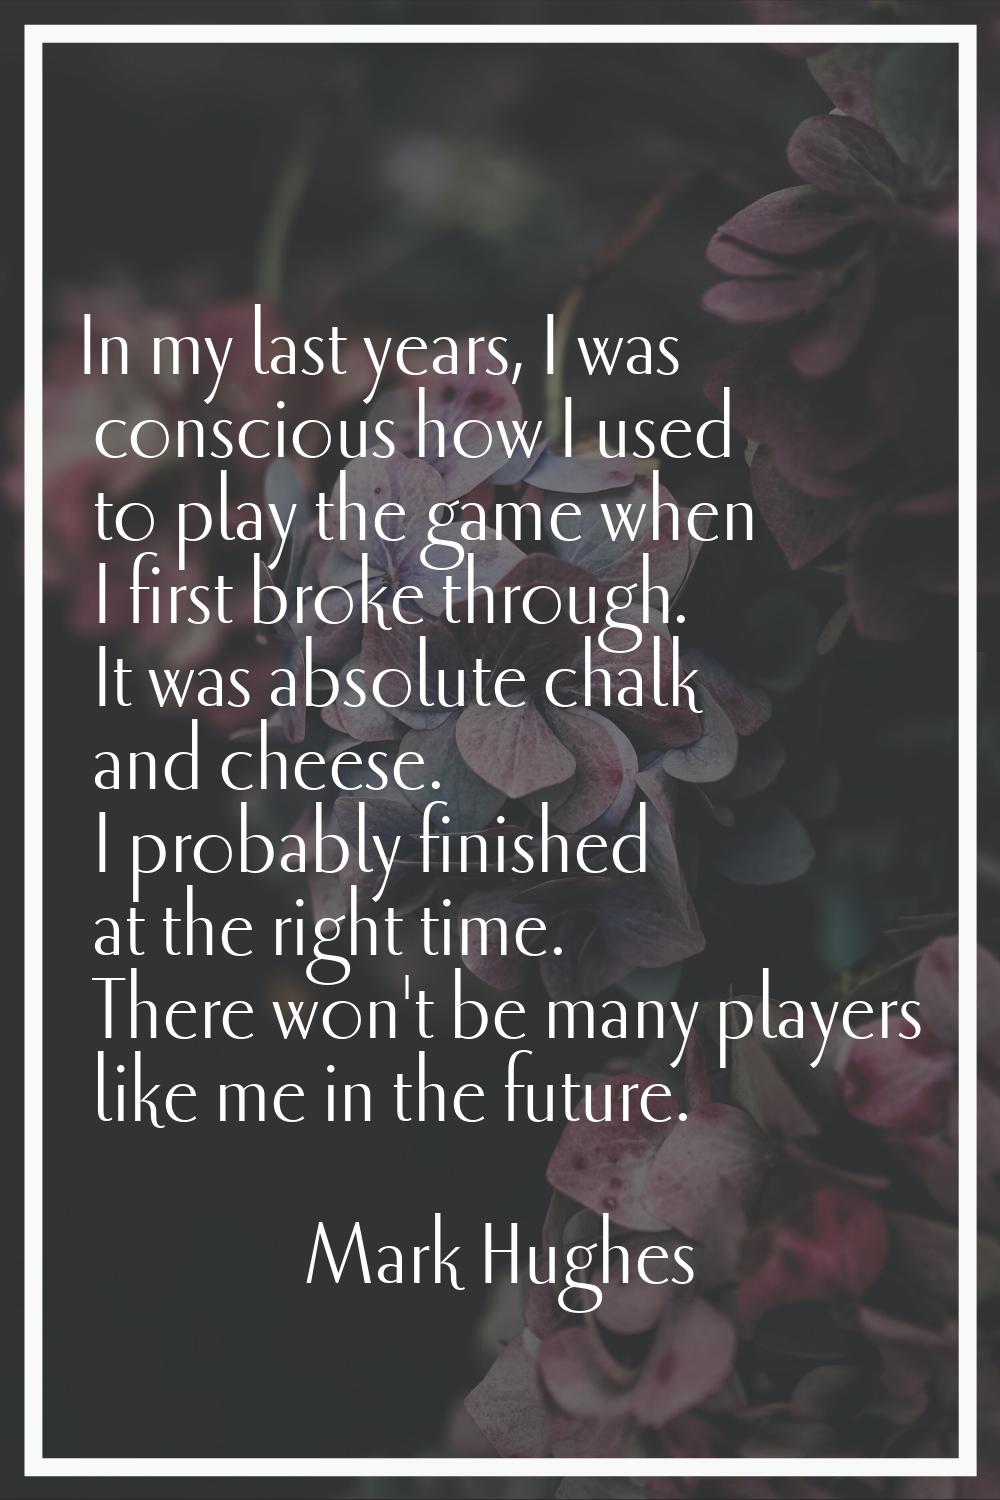 In my last years, I was conscious how I used to play the game when I first broke through. It was ab